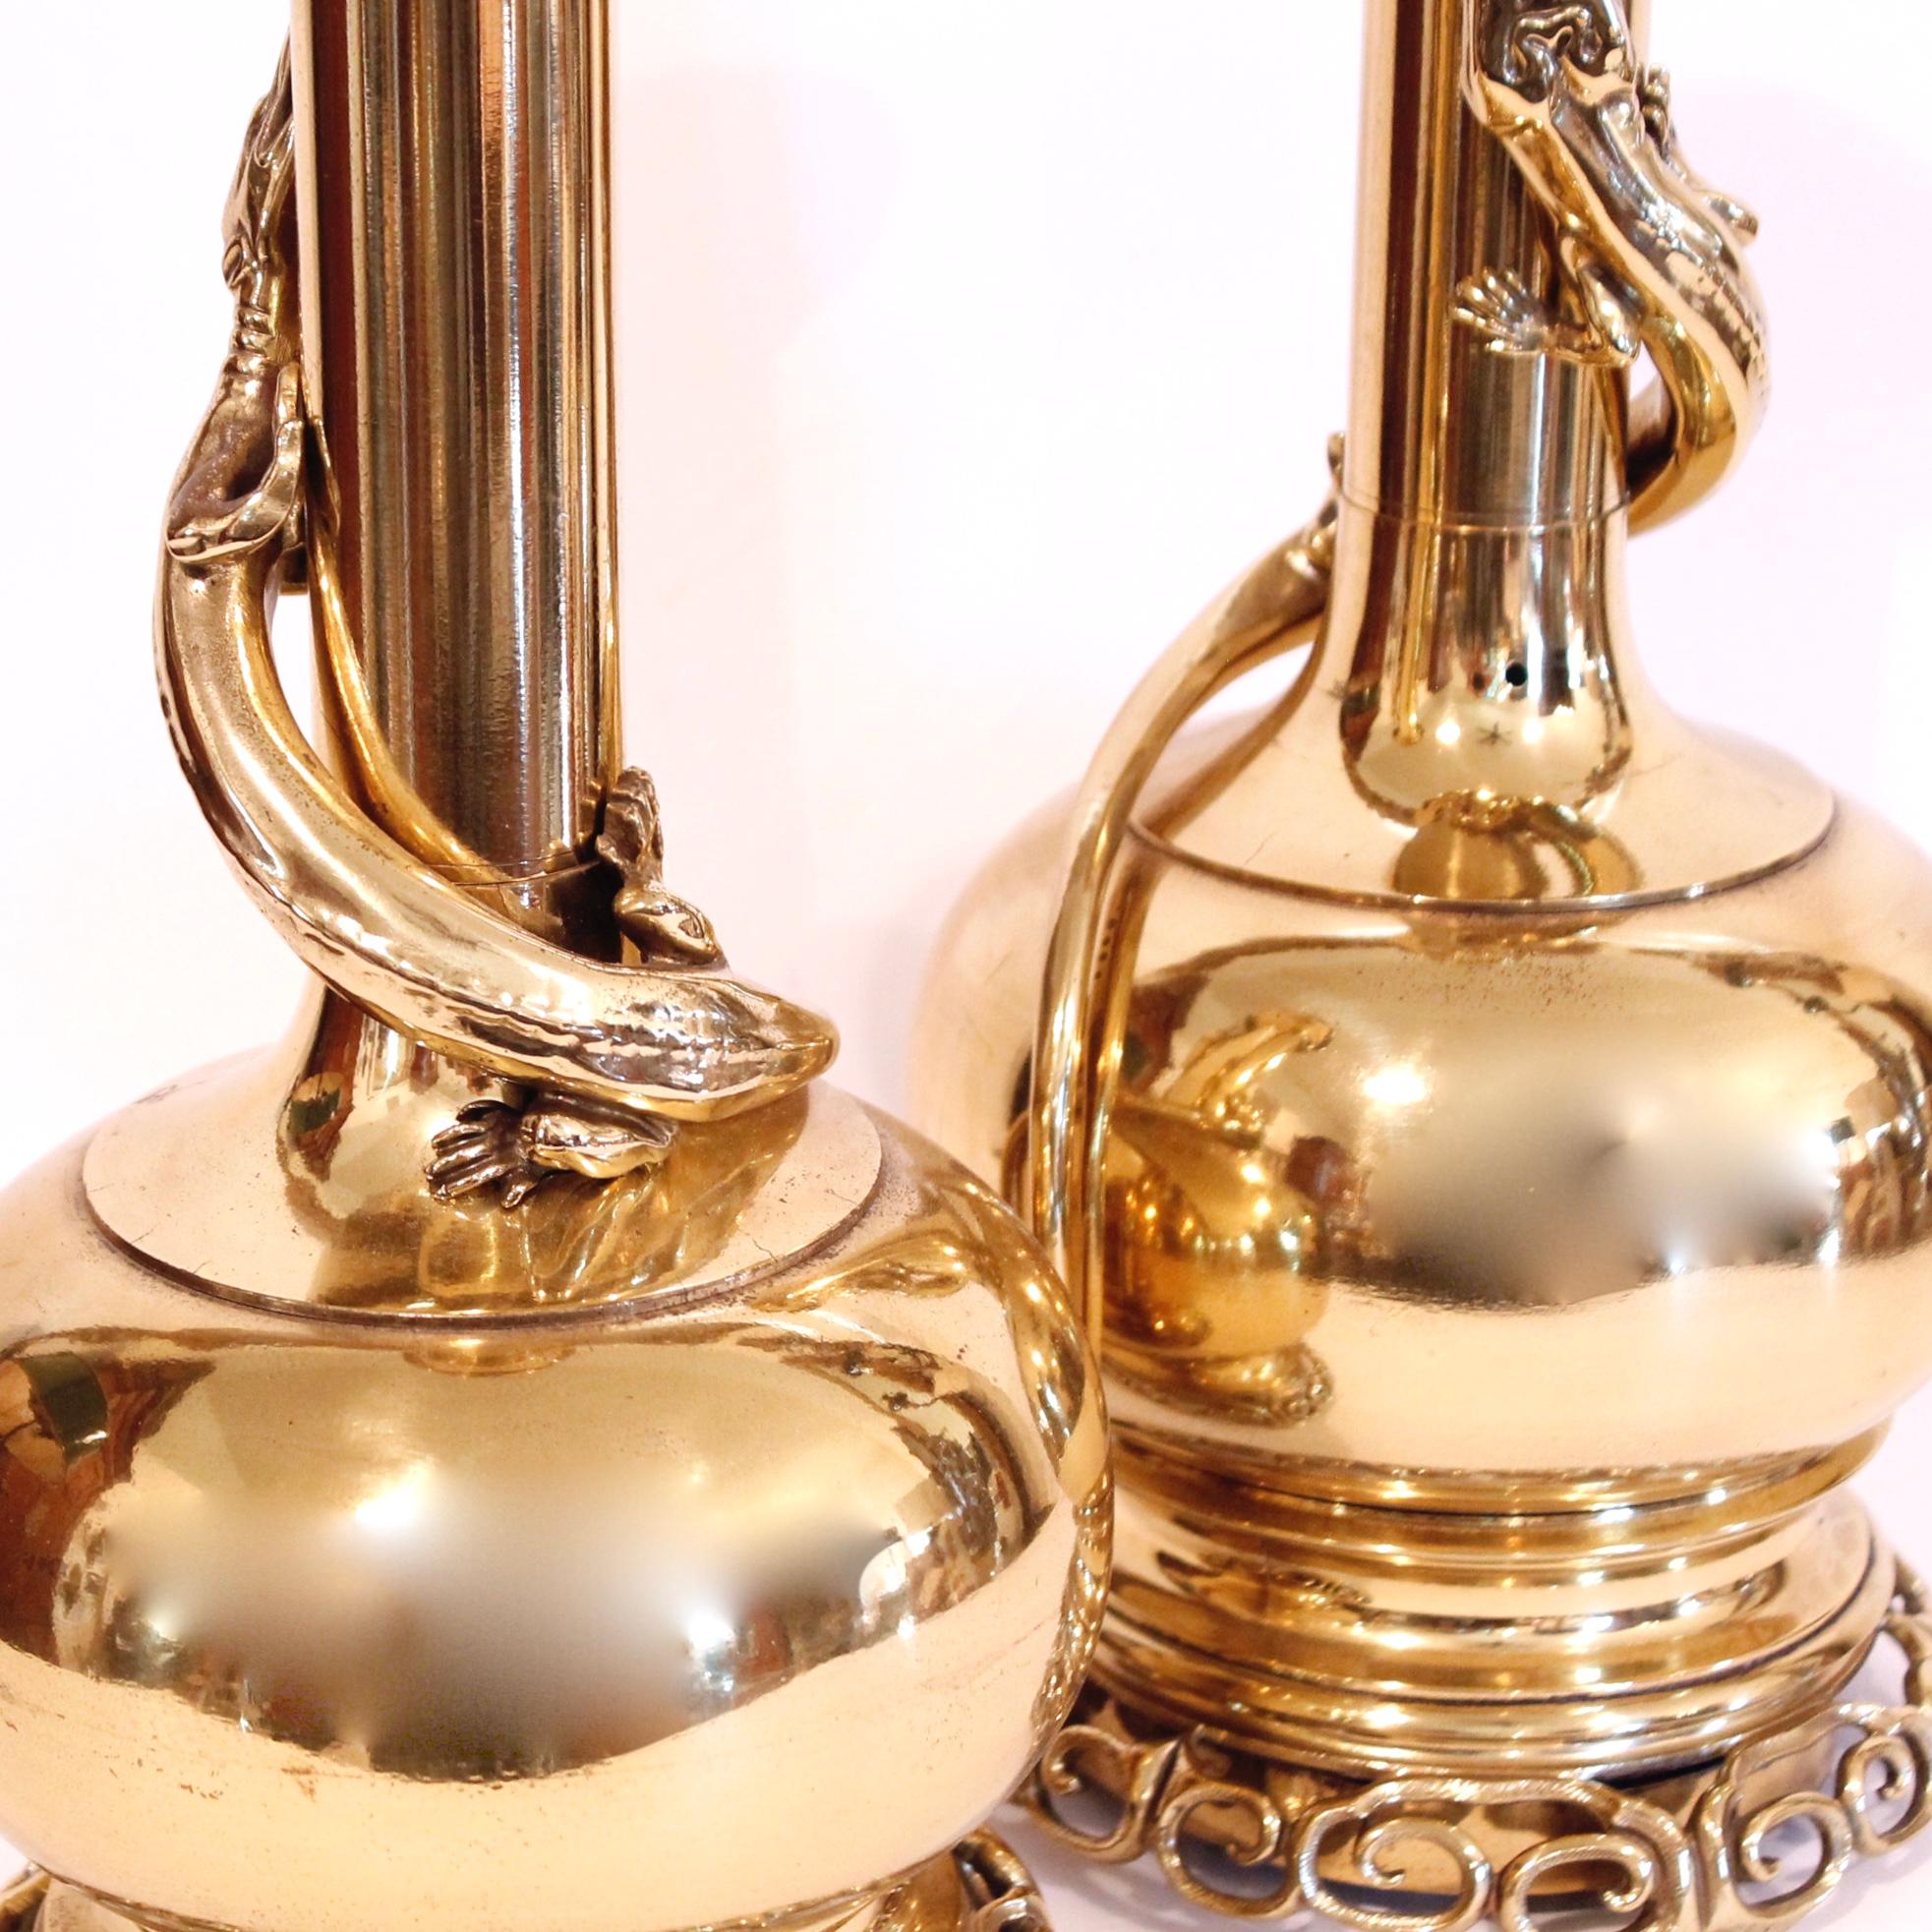 Pair Of Chinese Polished Brass Gourd Shaped Bottle Flasks With Lizards In Good Condition For Sale In Free Union, VA